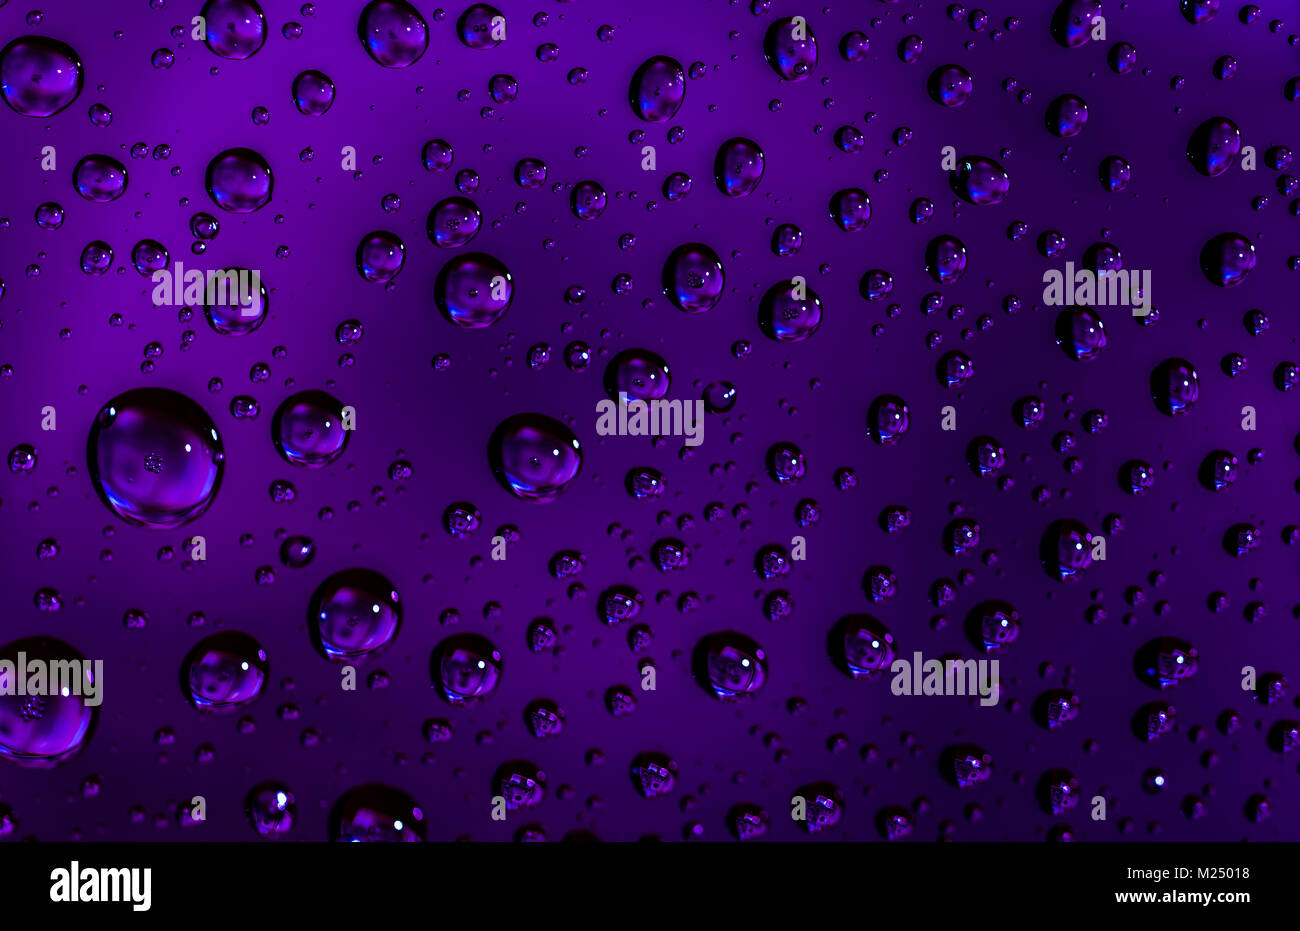 Macro shot detail reflection of dollars banknote in water drops. Purple water drops background Stock Photo